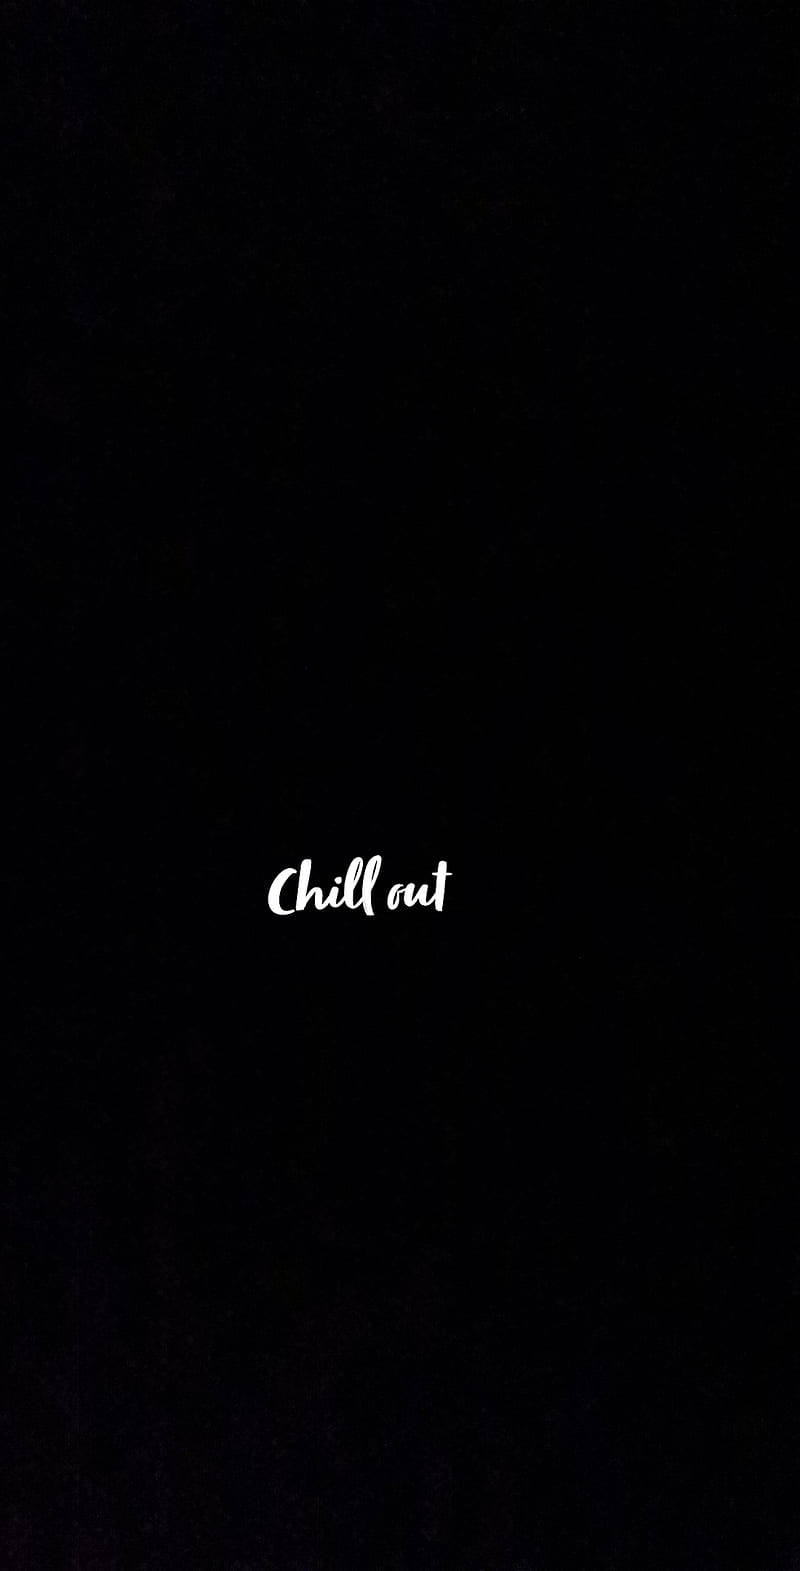 Chill Out Minimalist Lettering Background